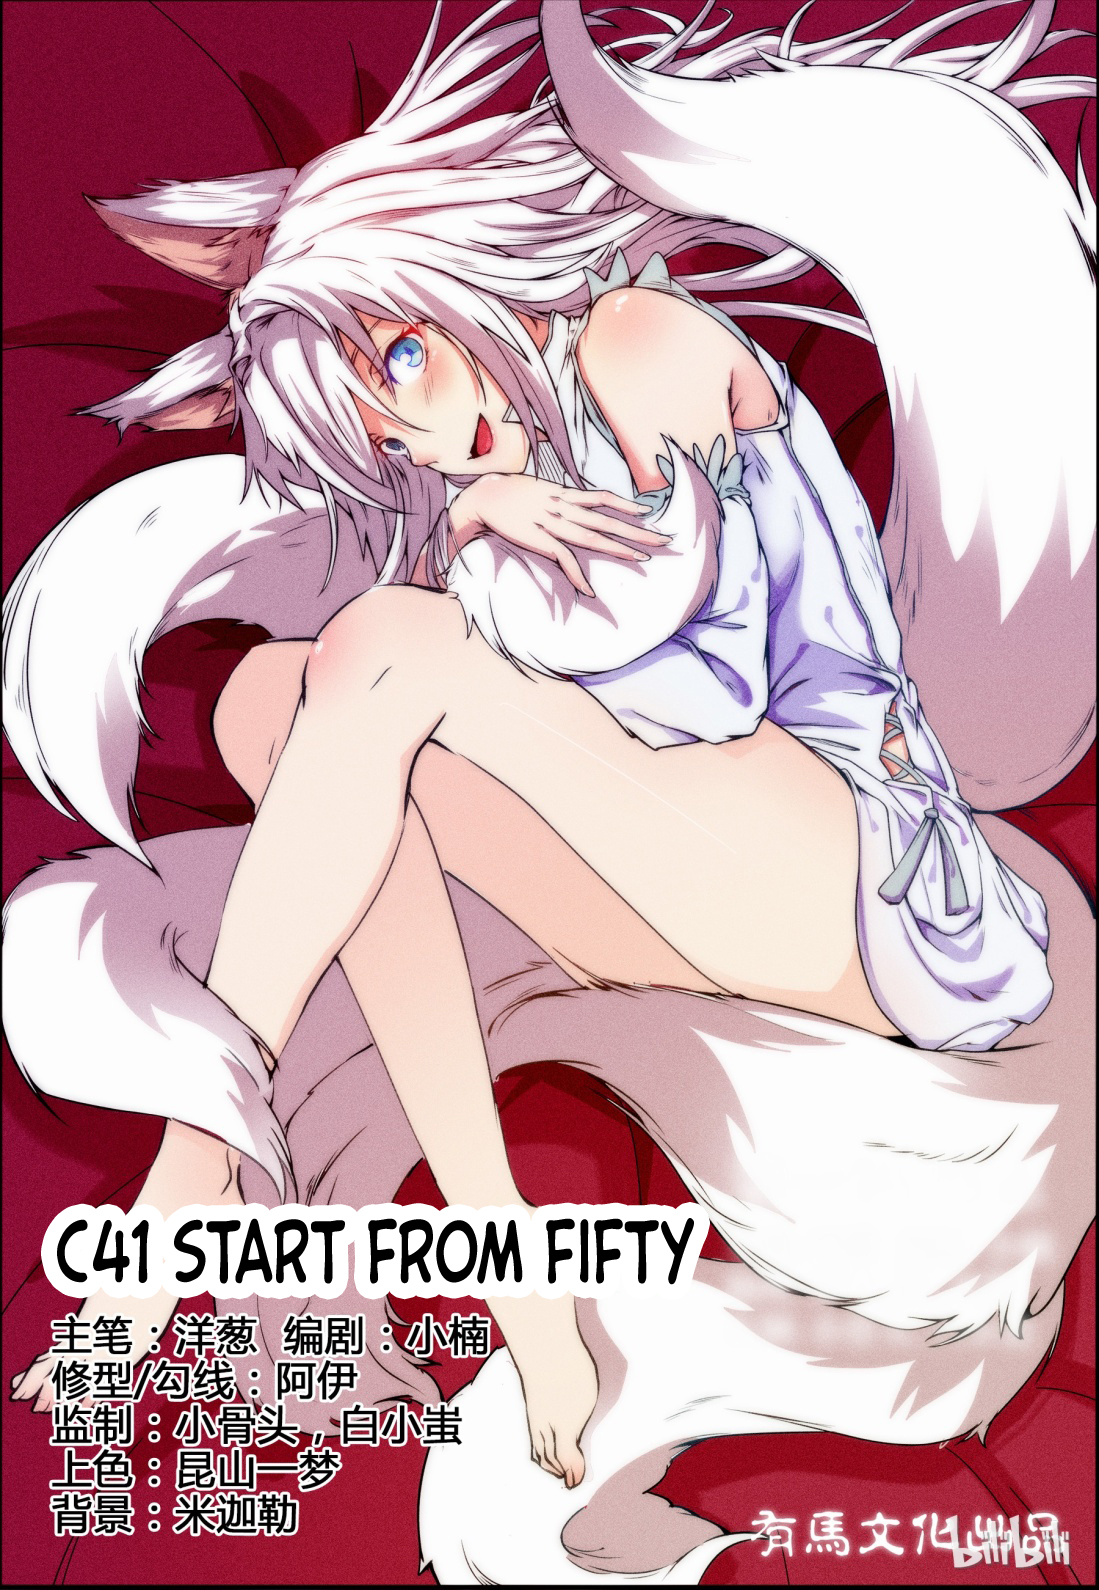 My Wife Is A Fox Spirit Ch. 41 Start From Fifty